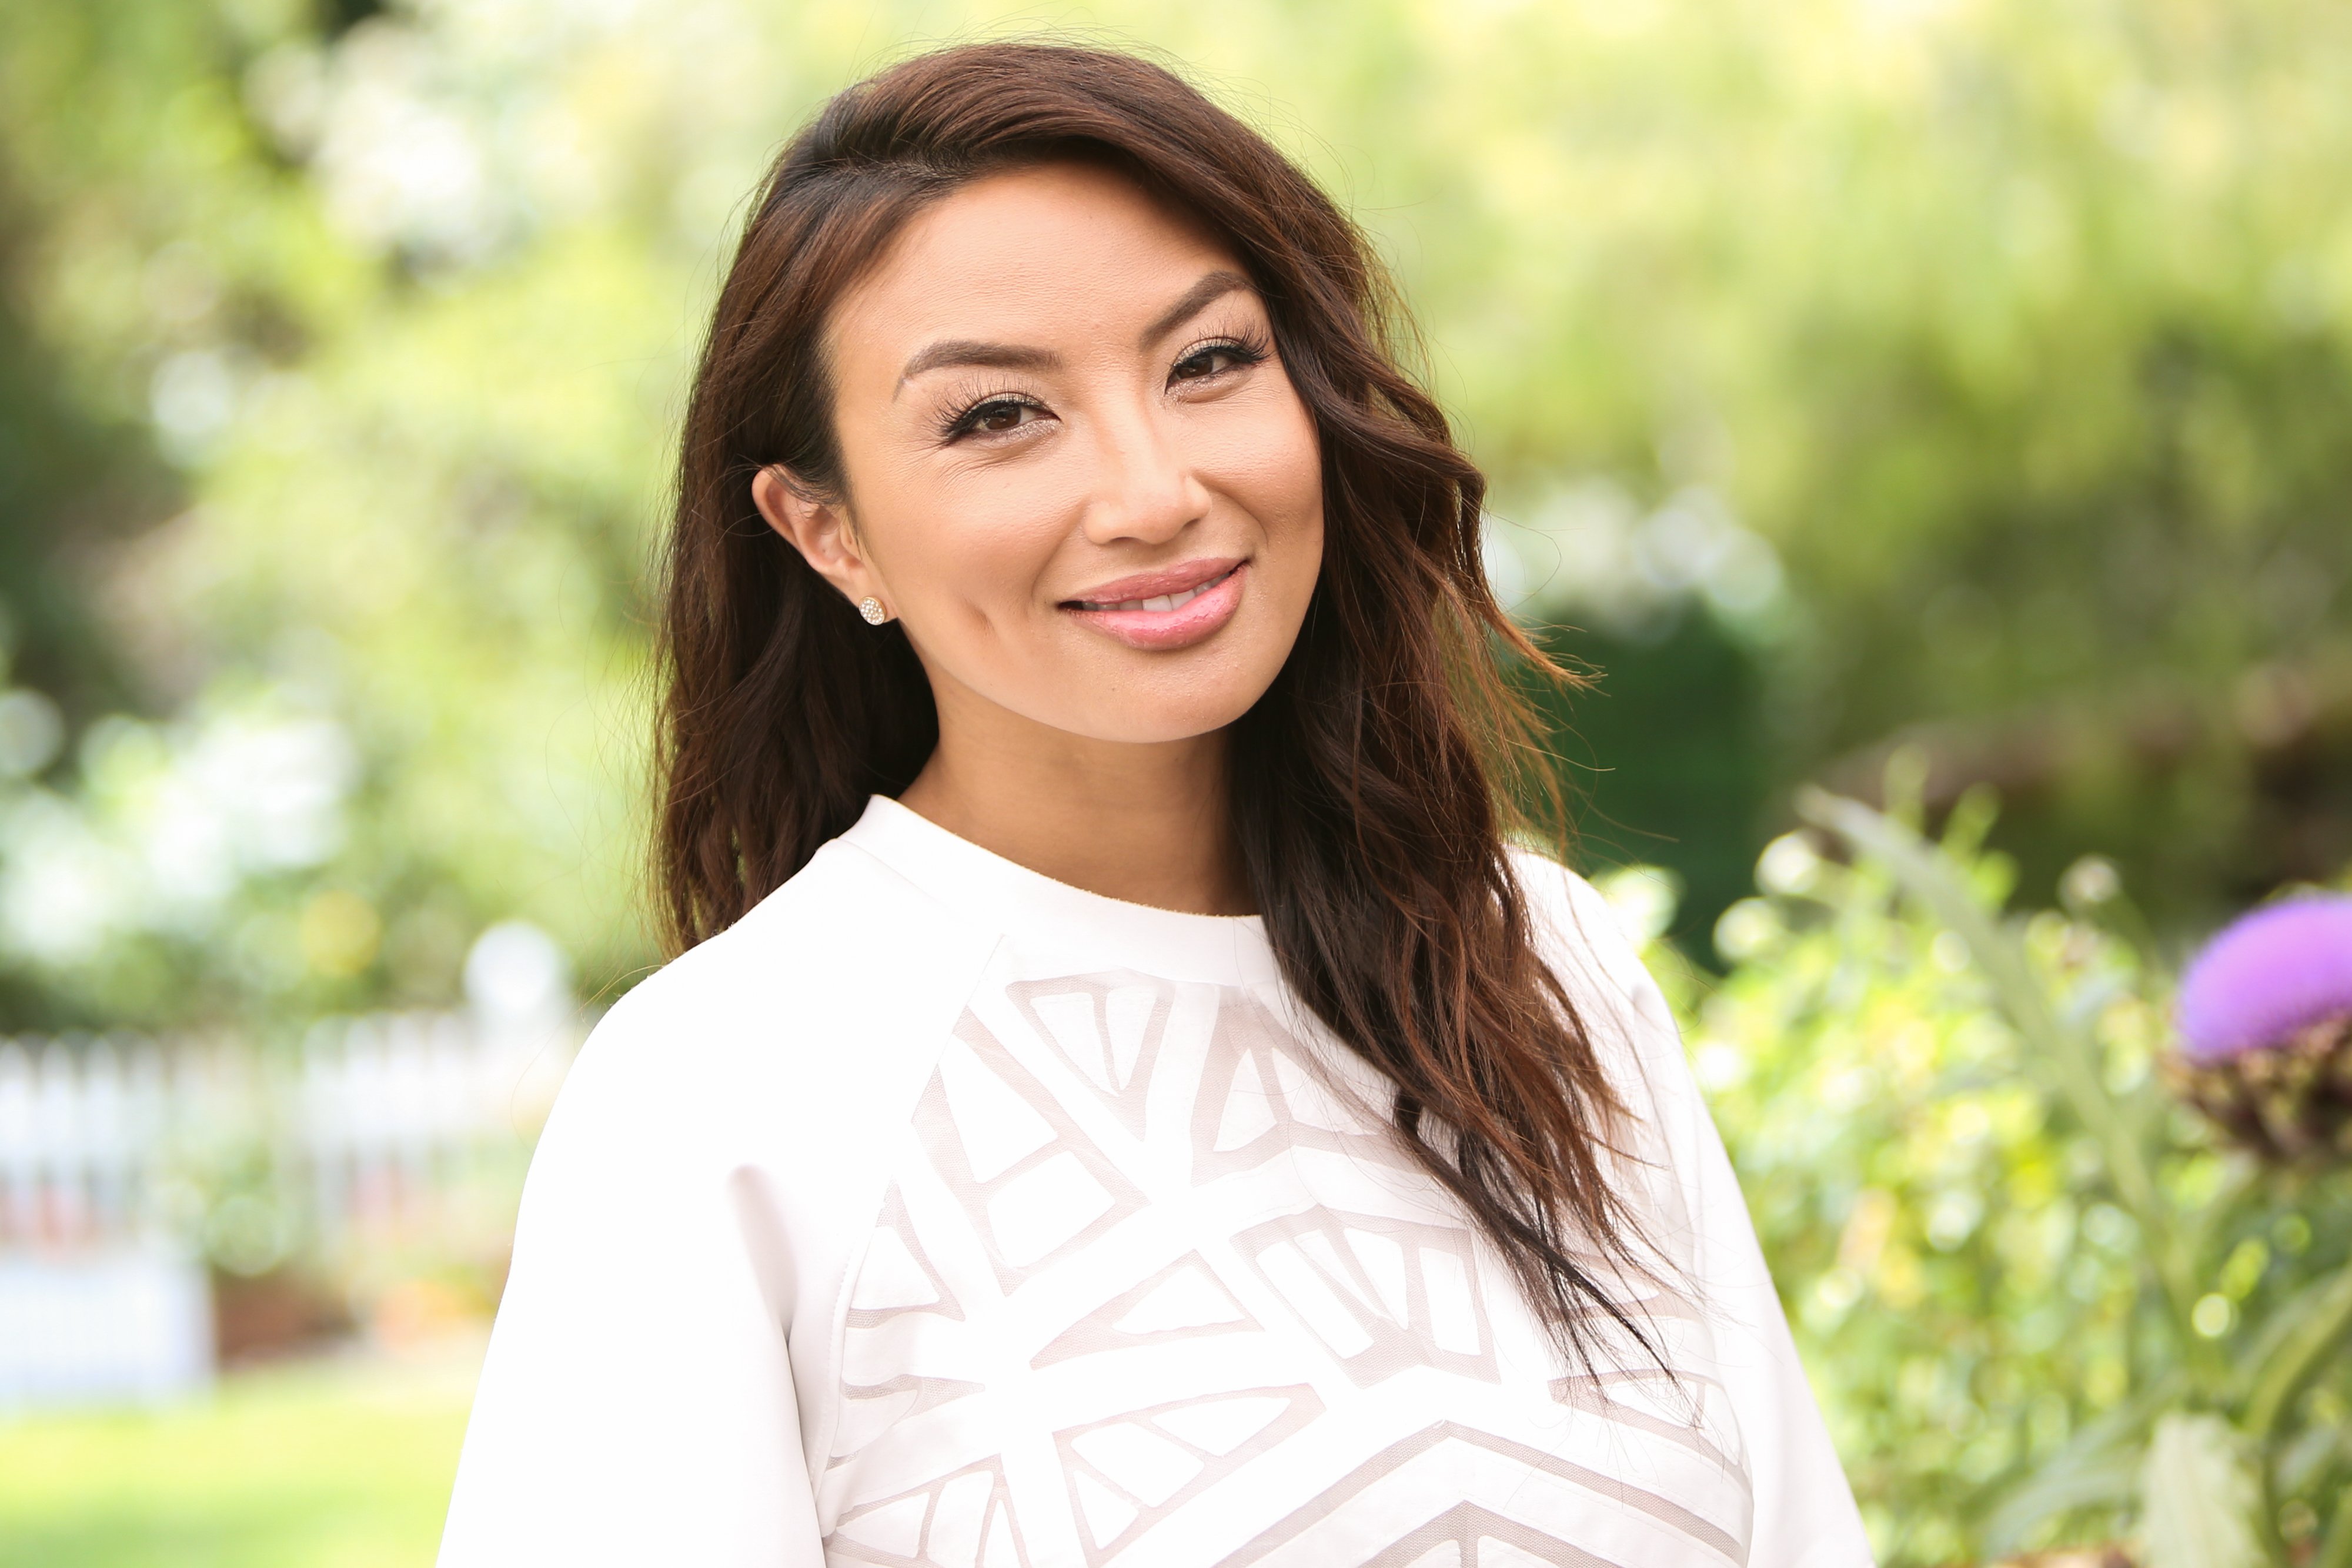 Jeannie Mai visits Hallmark's "Home & Family" at Universal Studios Hollywood on June 11, 2019, in Universal City, California. | Source: Getty Images.